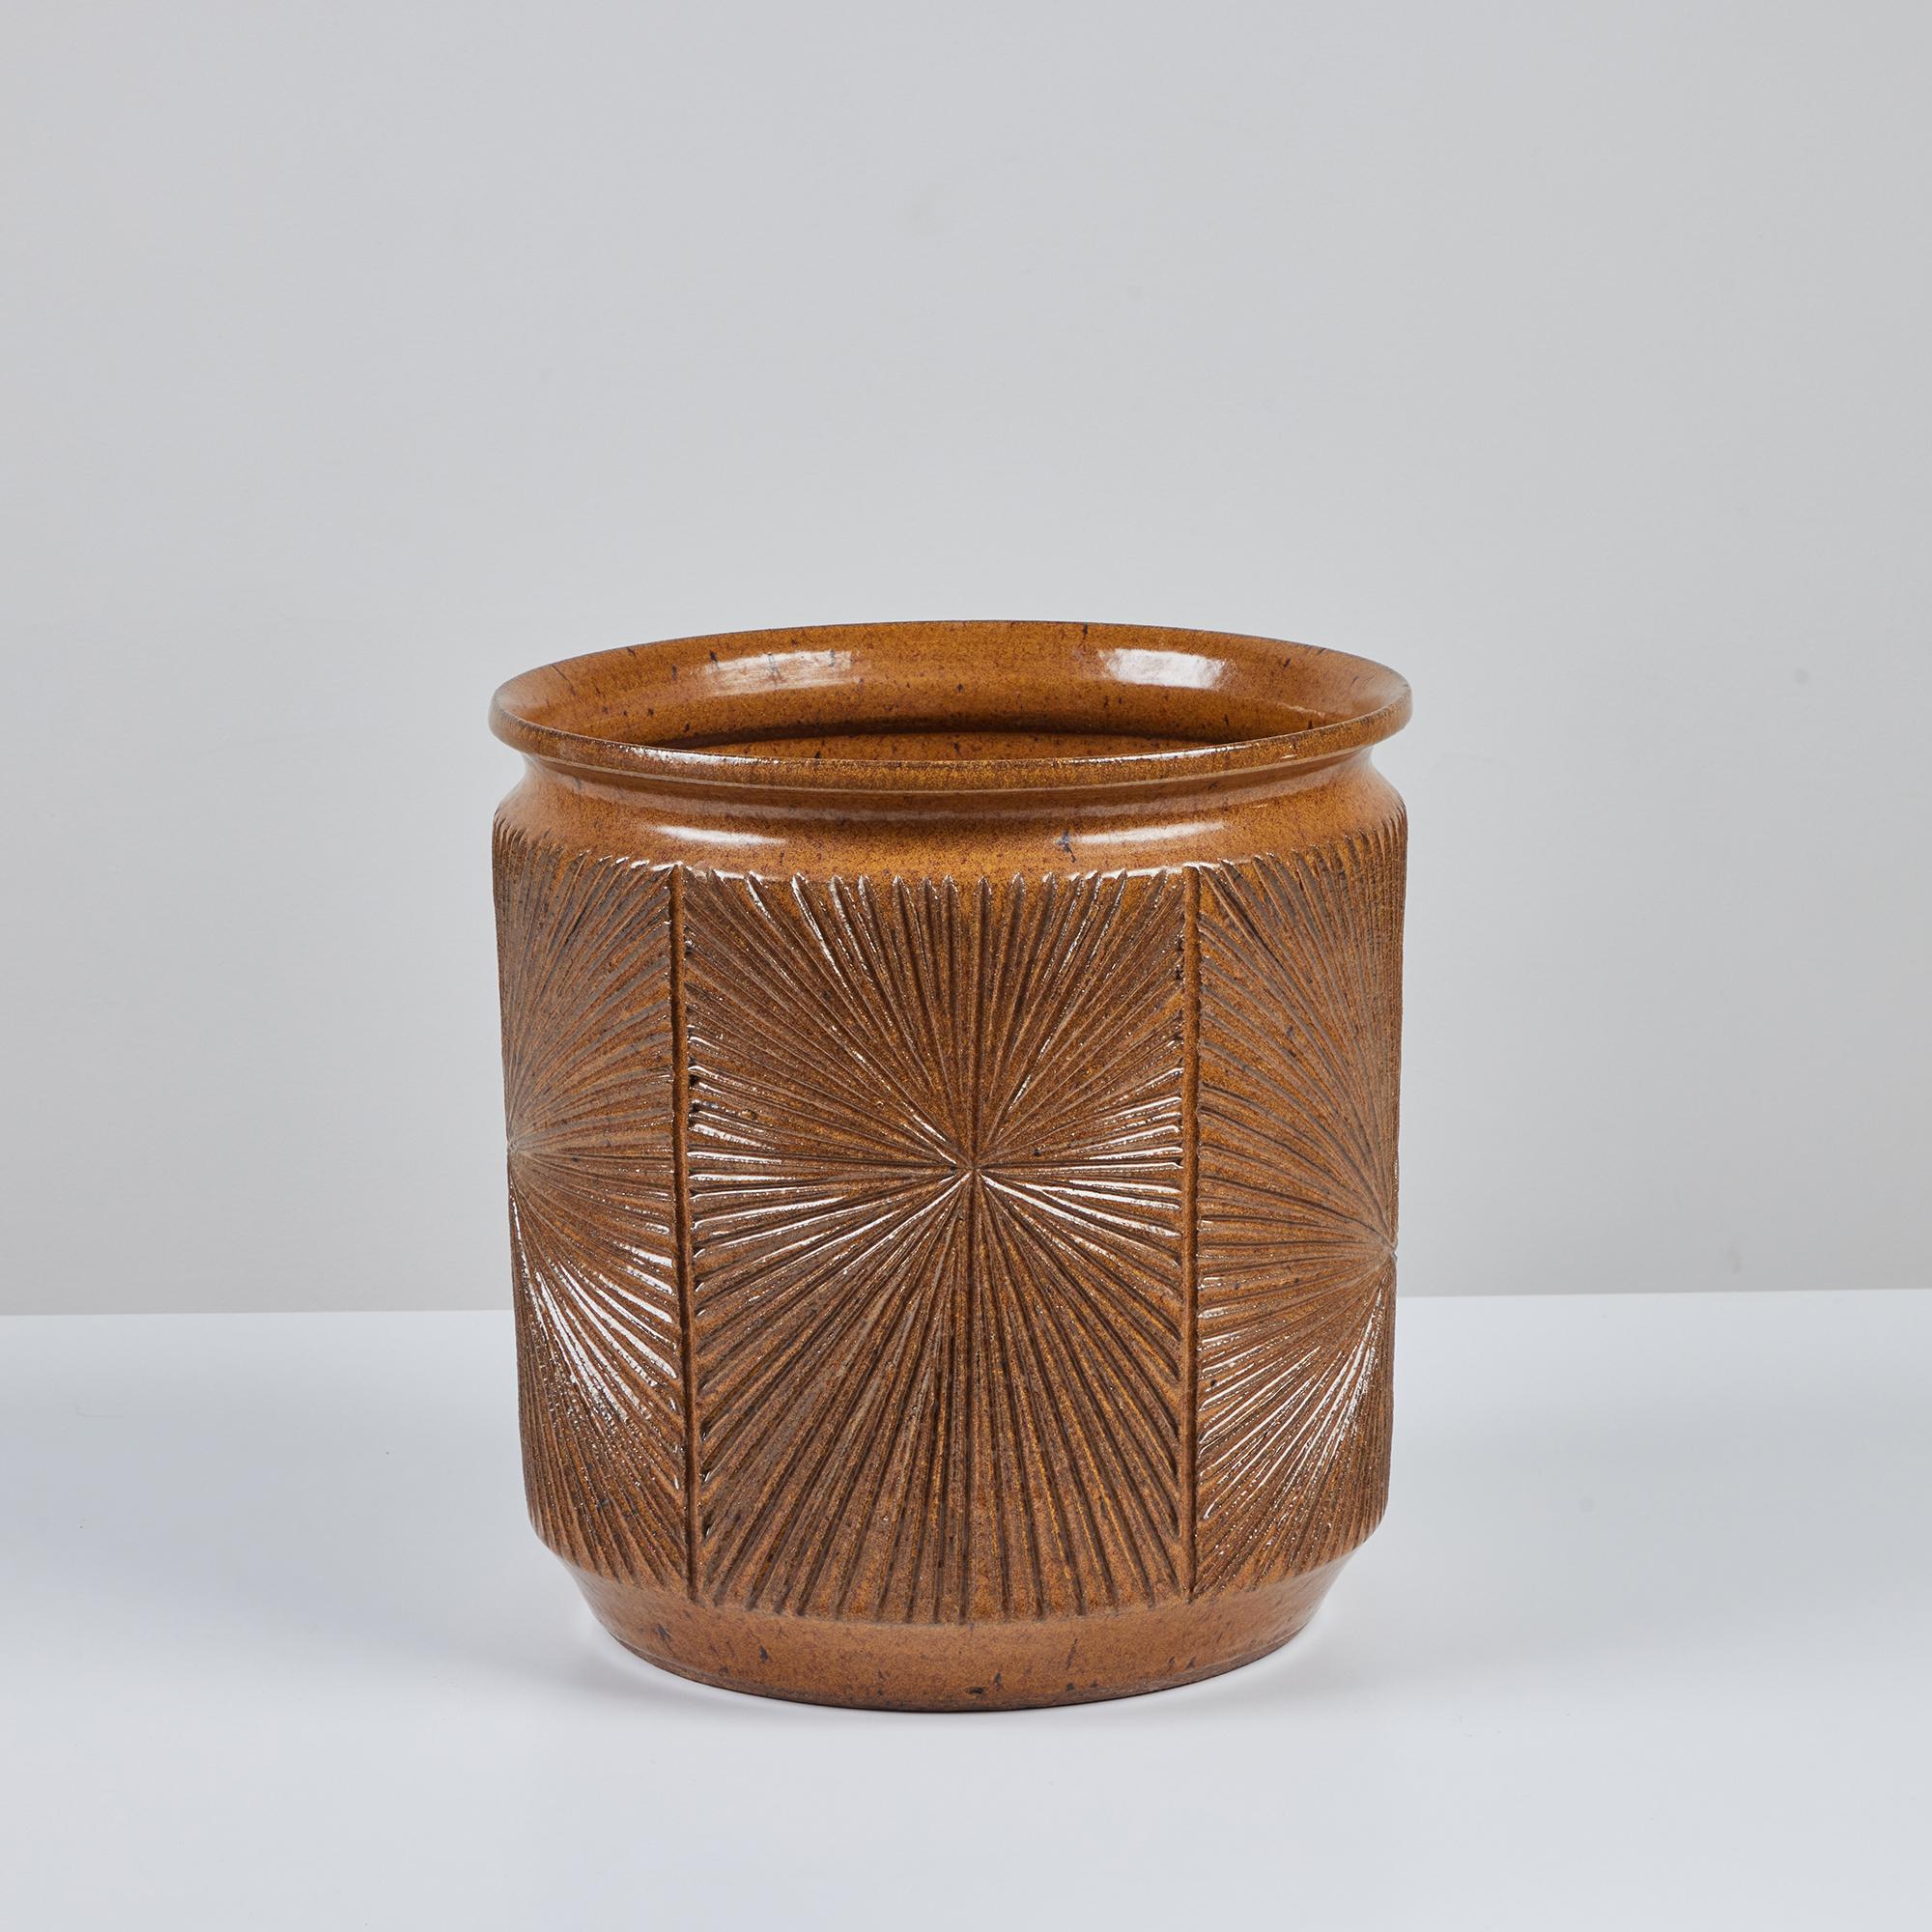 Hand thrown stoneware planter from Earthgender, David Cressey and Robert Maxwell’s early 1970s project. This 13.5” diameter example is incised in the “Sunburst” design a pattern of lines radiating from a central point. The exterior and interior of